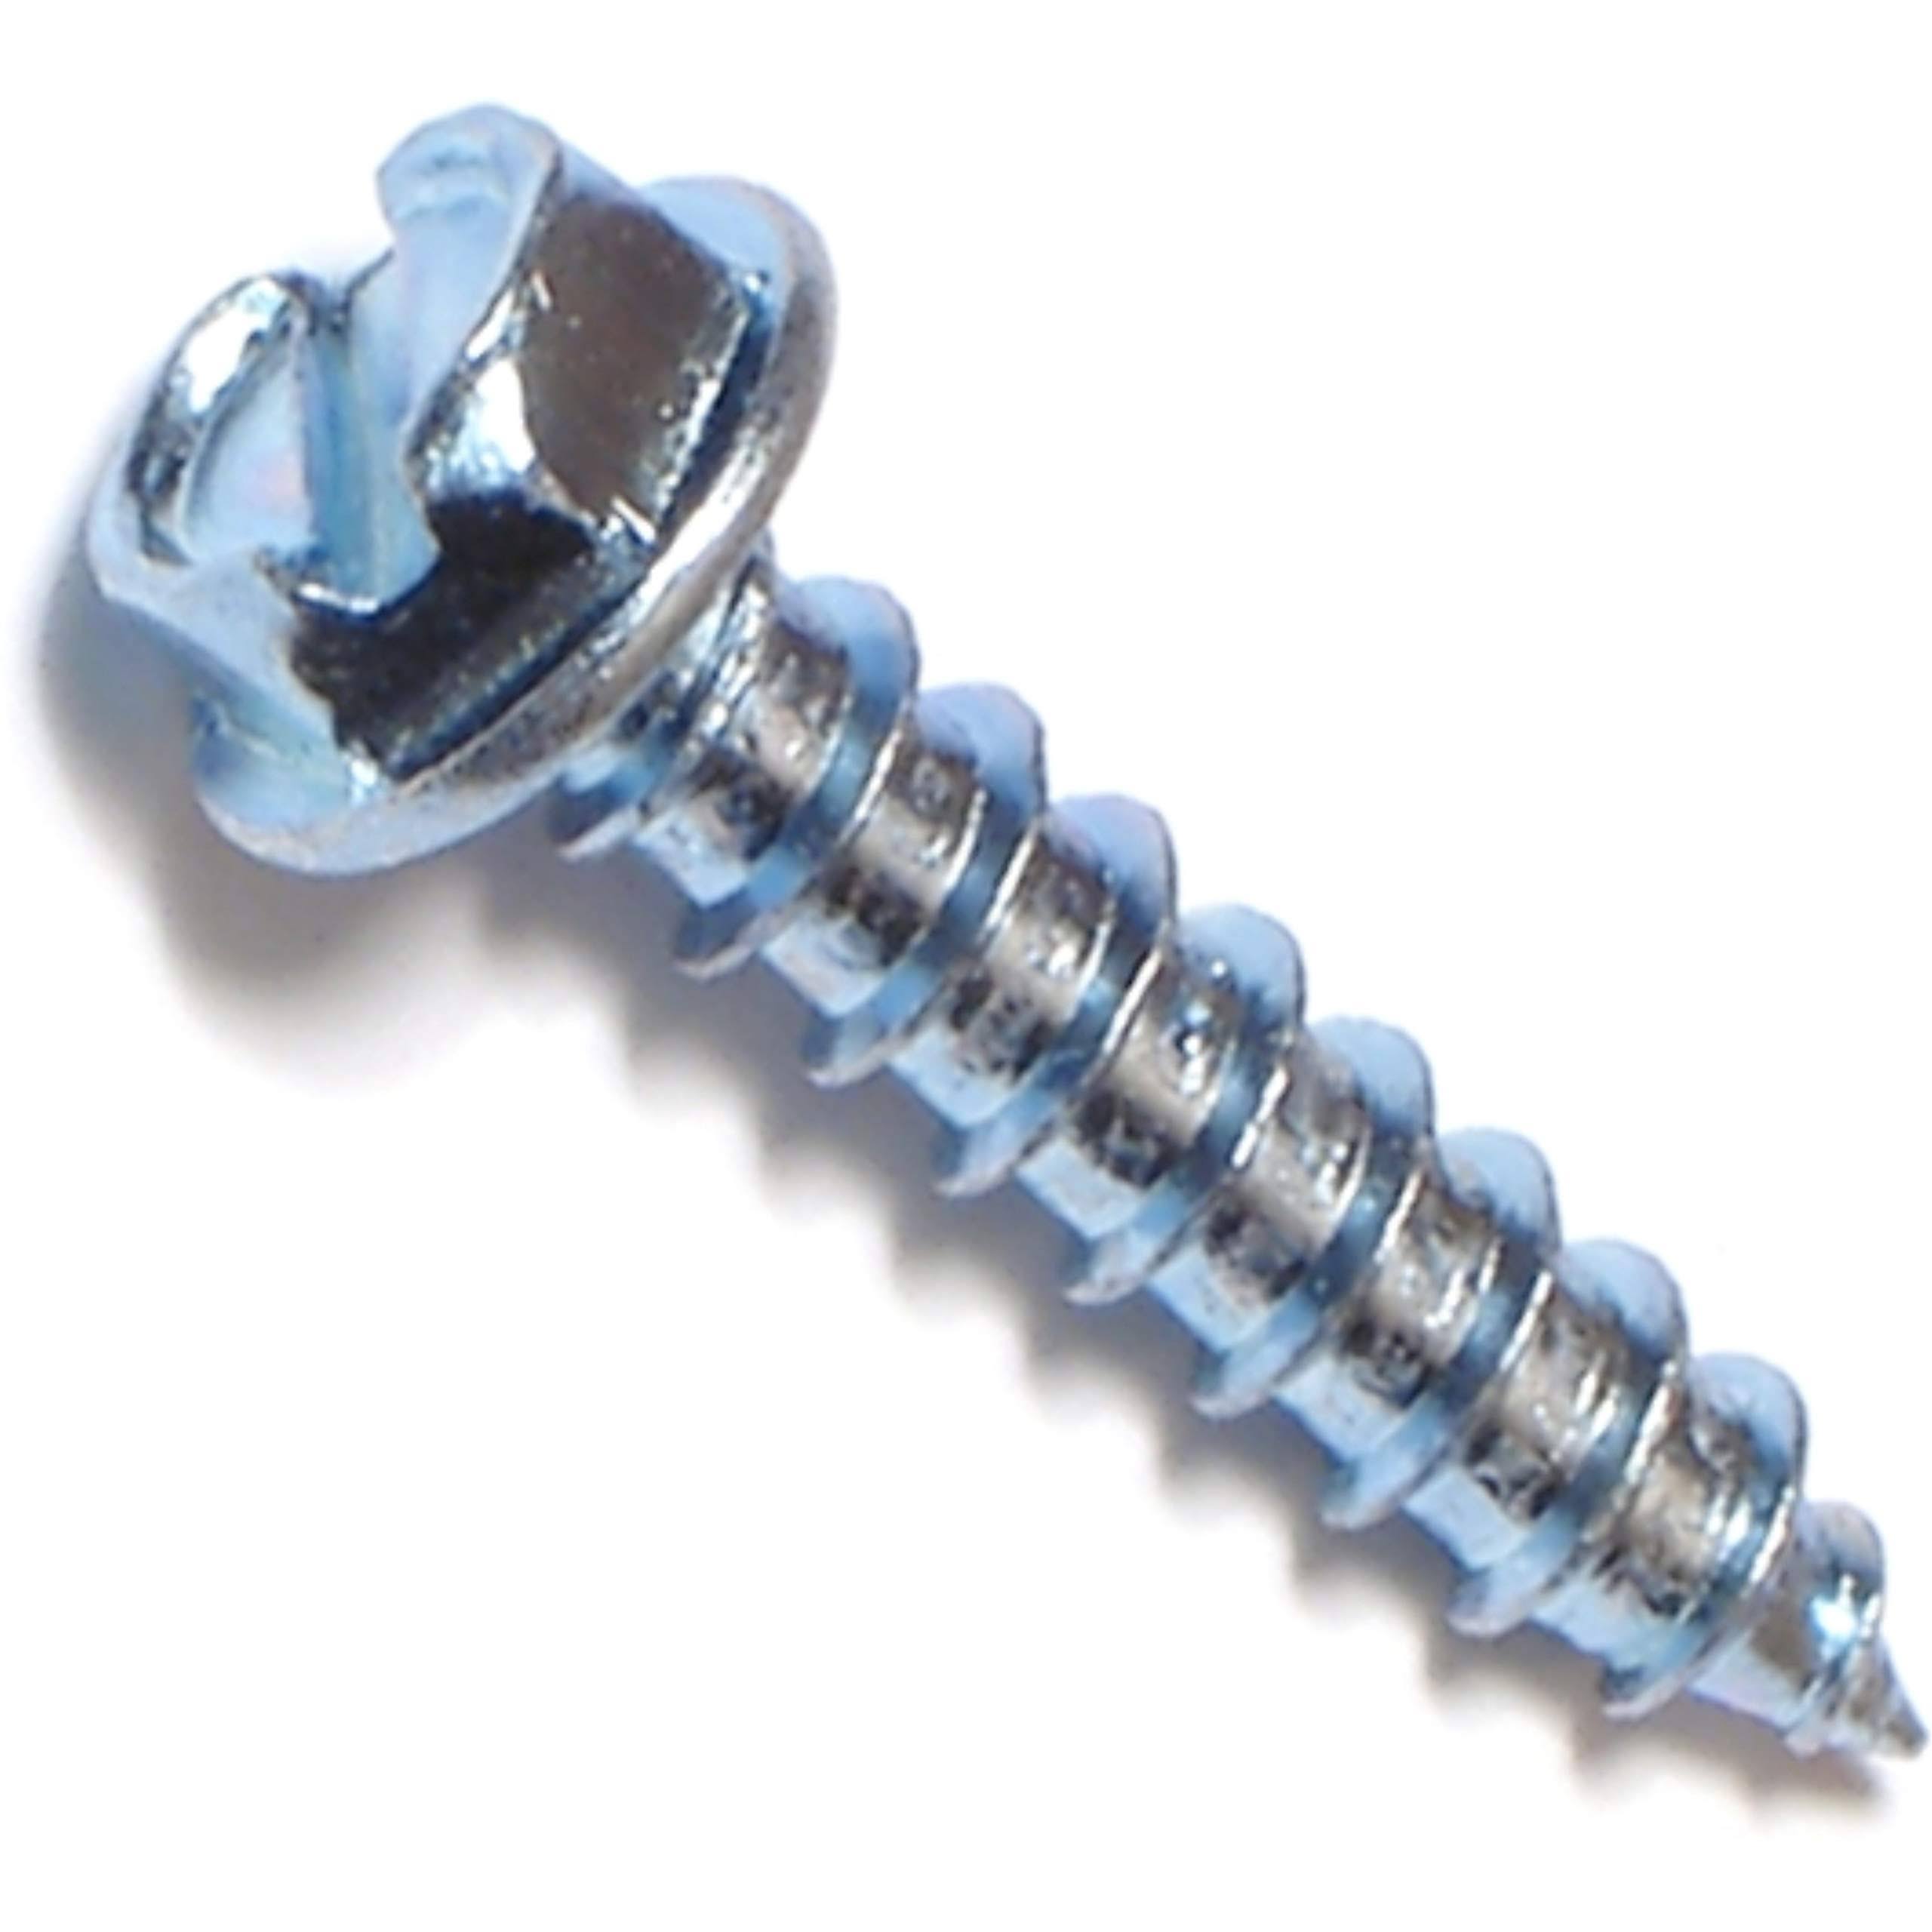 Midwest Fastener Tap Slotted Hex Zinc Screw - #12 X 1"